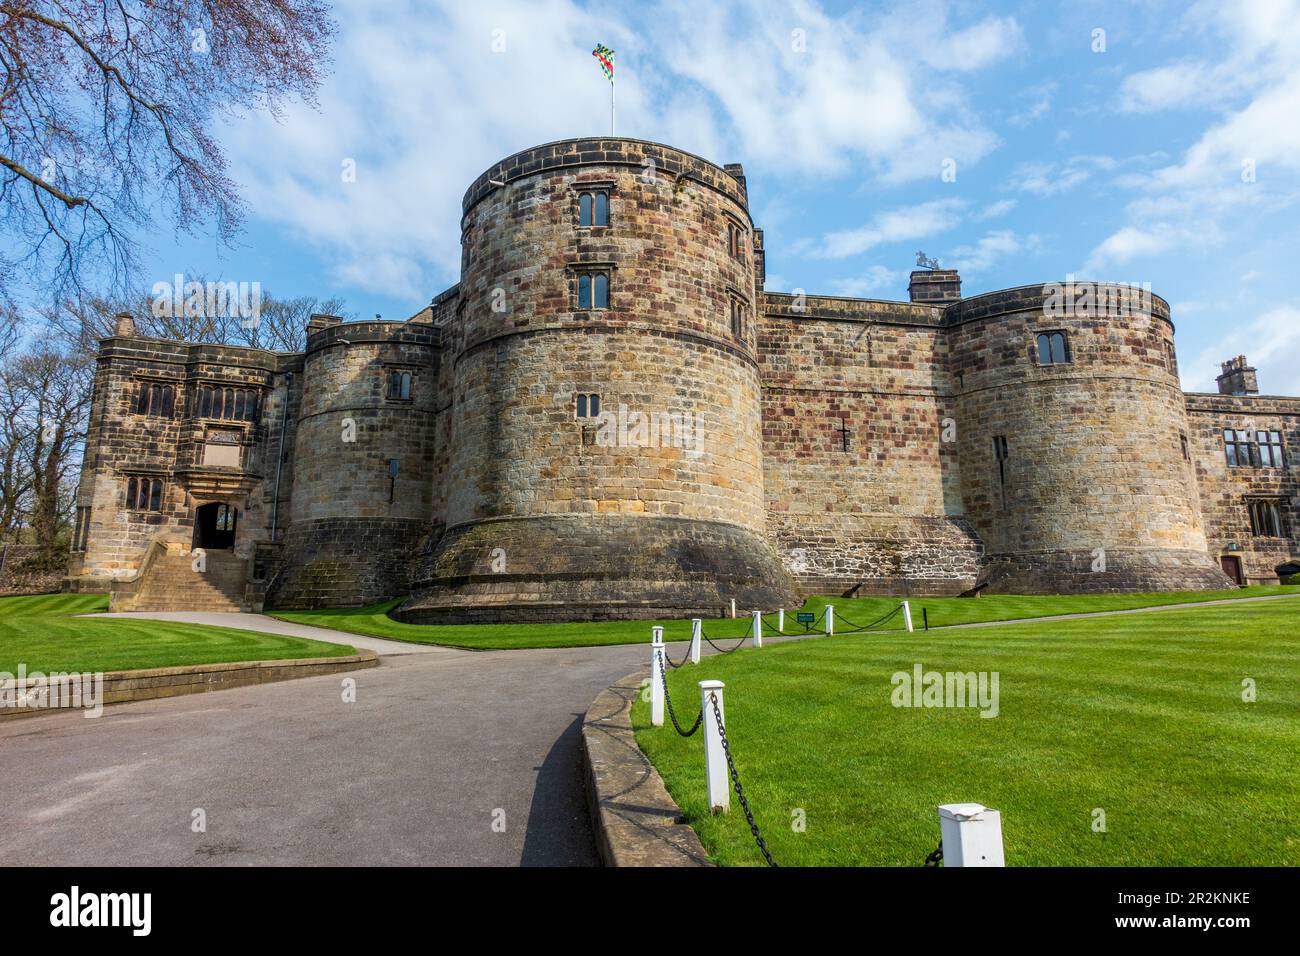 Medieval Keep at Skipton Castle in Skipton, North Yorkshire, England, UK Stock Photo